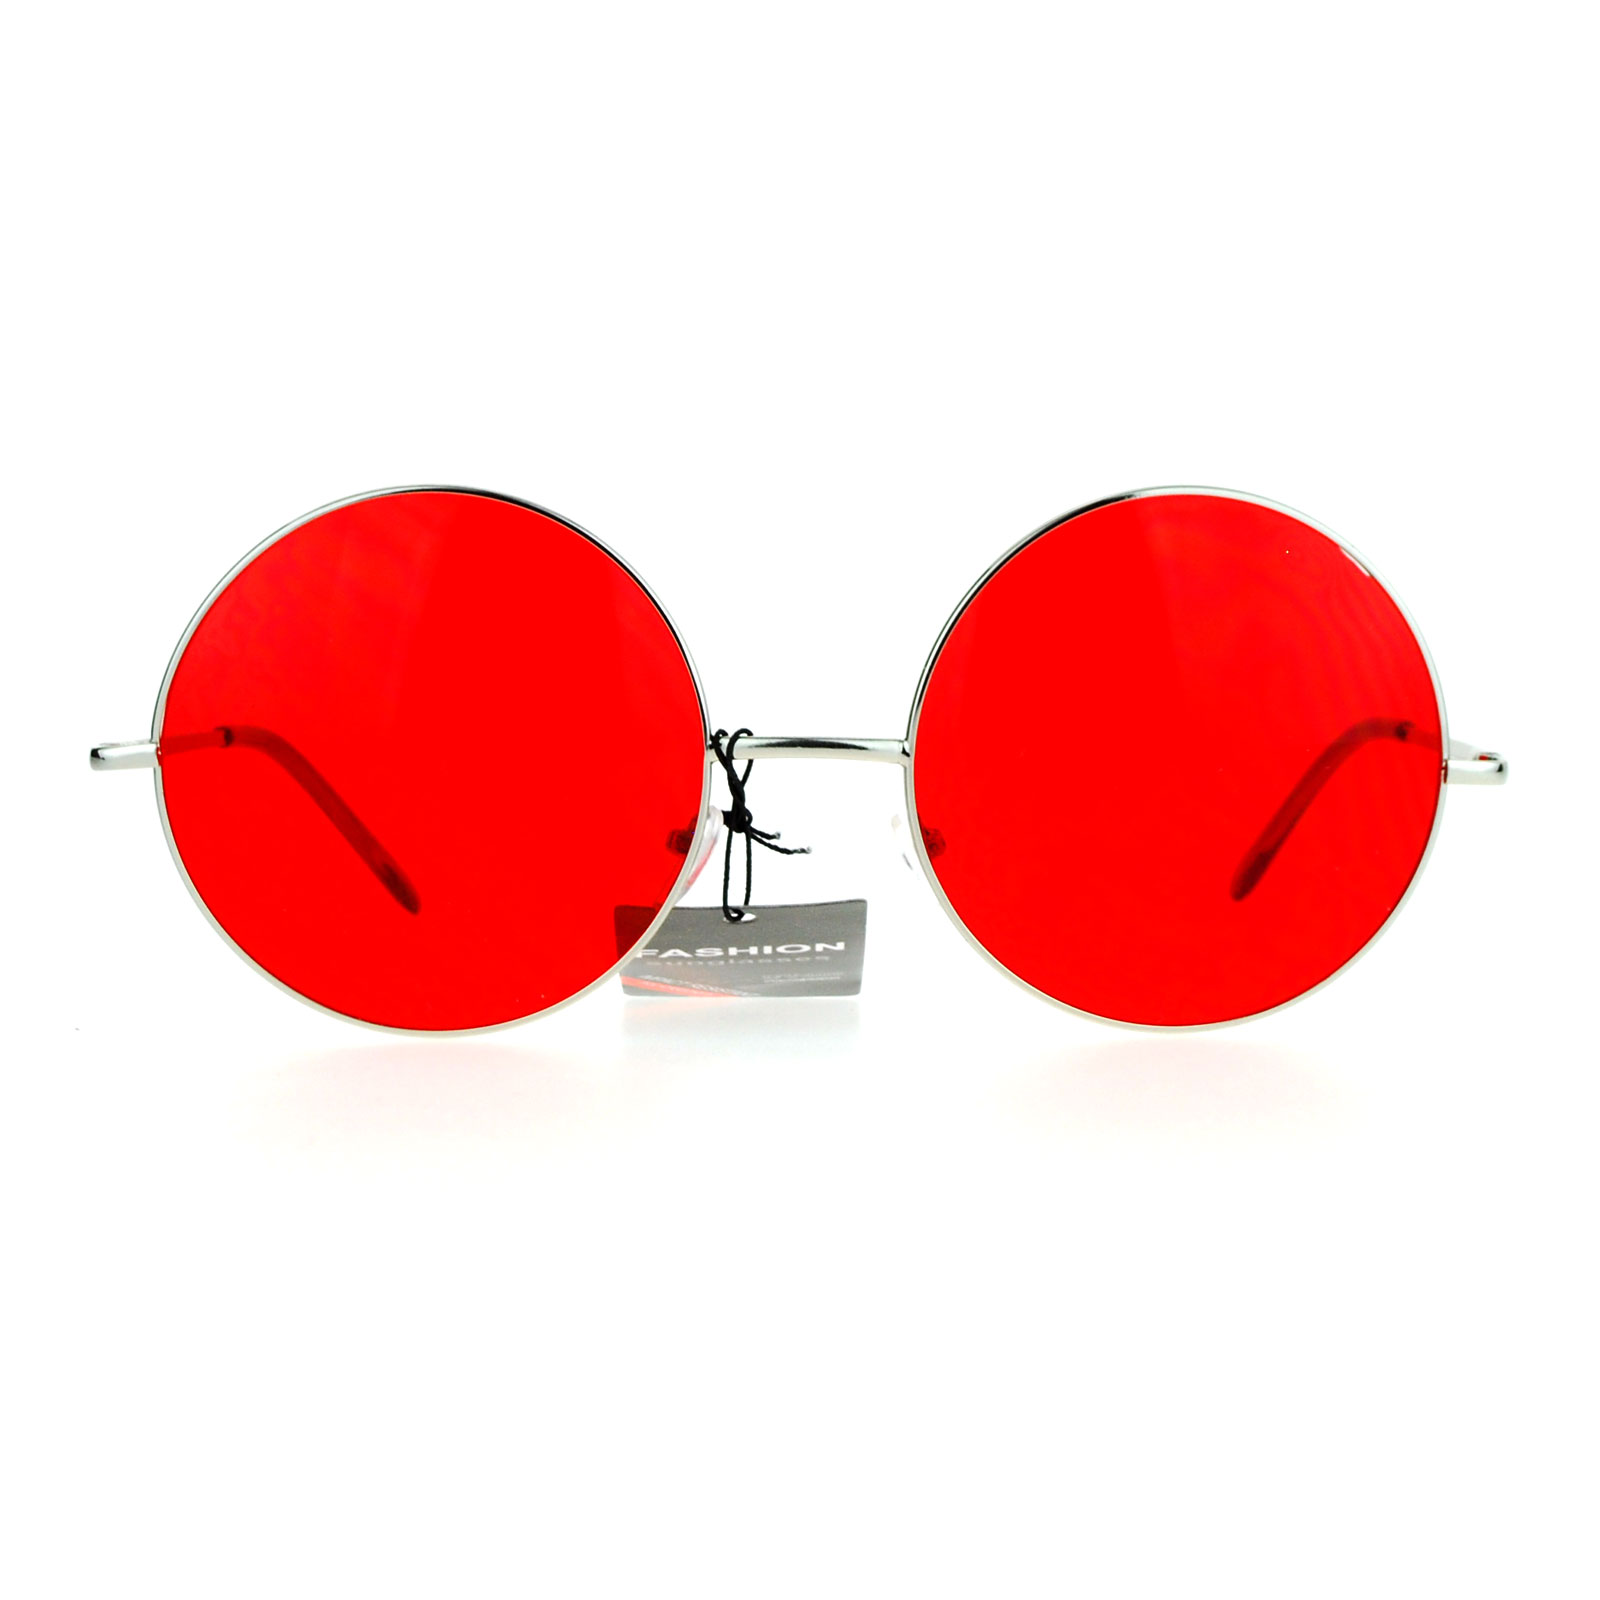 SA106 Hippie Oceanic Gradient Large Circle Lens Sunglasses Red - image 1 of 3